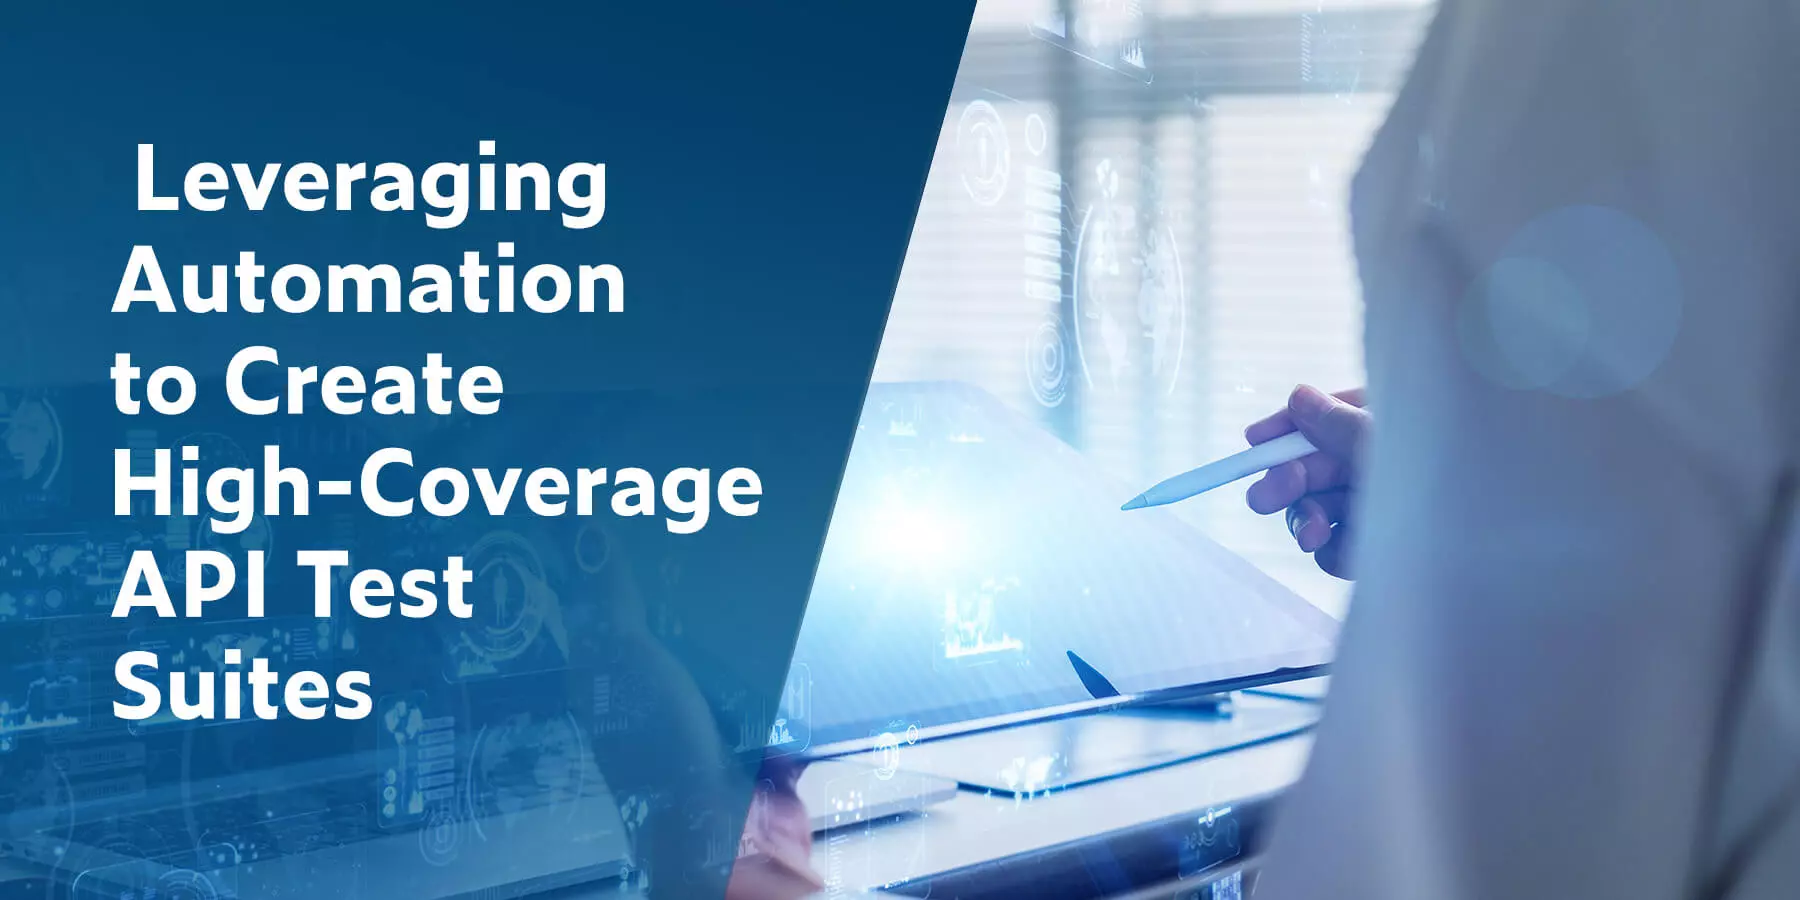 Leveraging Automation to Create High-Coverage API Test Suites